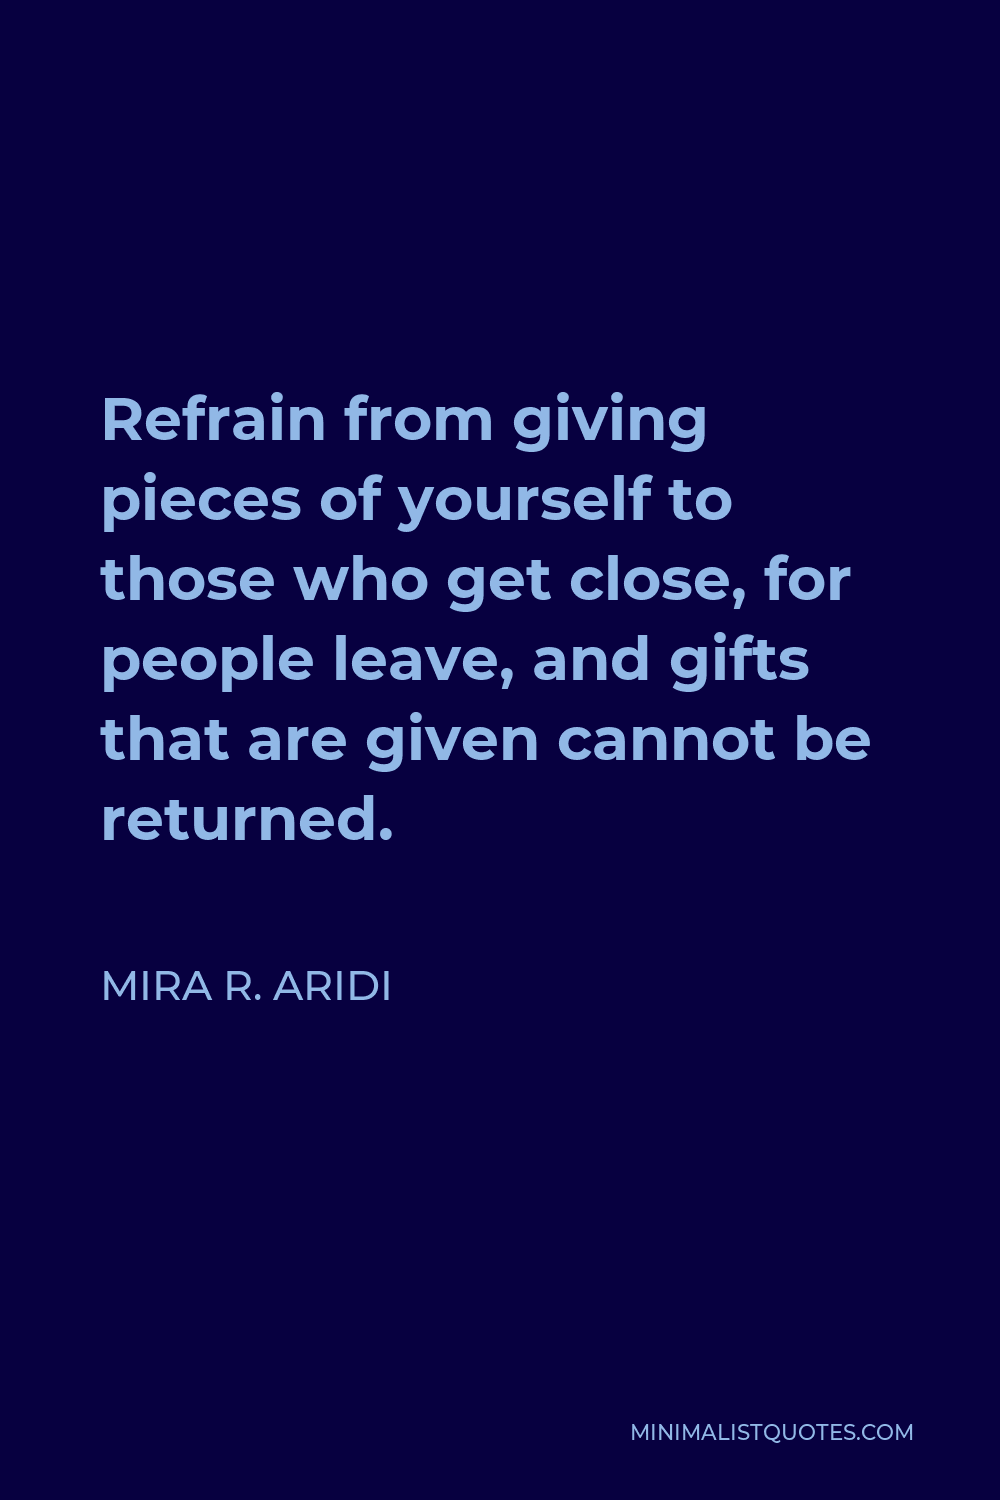 Mira R. Aridi Quote - Refrain from giving pieces of yourself to those who get close, for people leave, and gifts that are given cannot be returned.